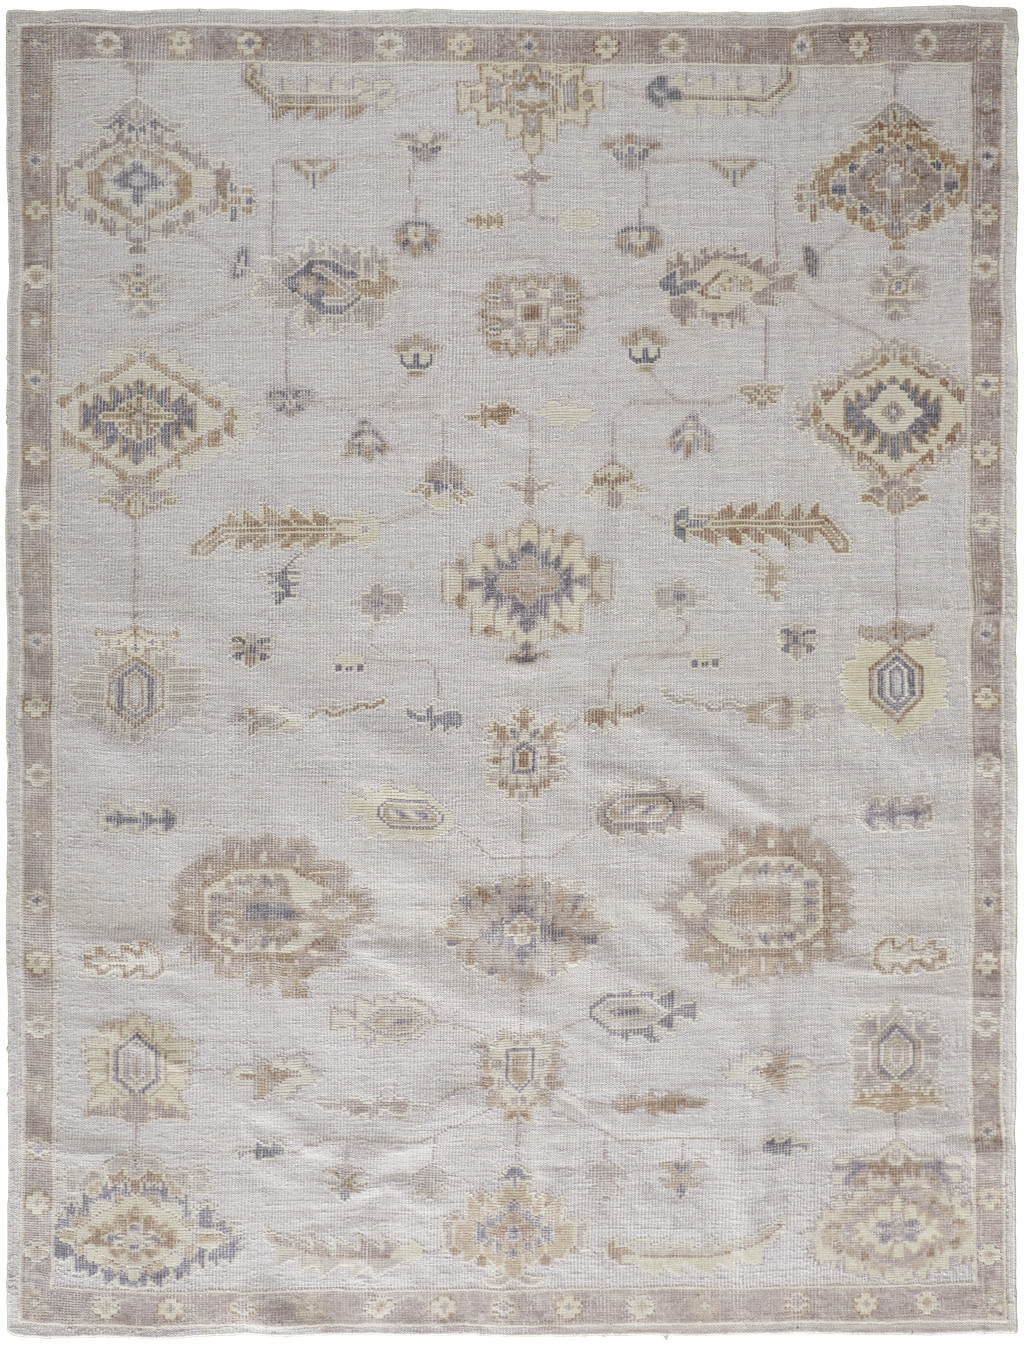 2' X 3' Ivory And Orange Floral Hand Knotted Stain Resistant Area Rug-514976-1